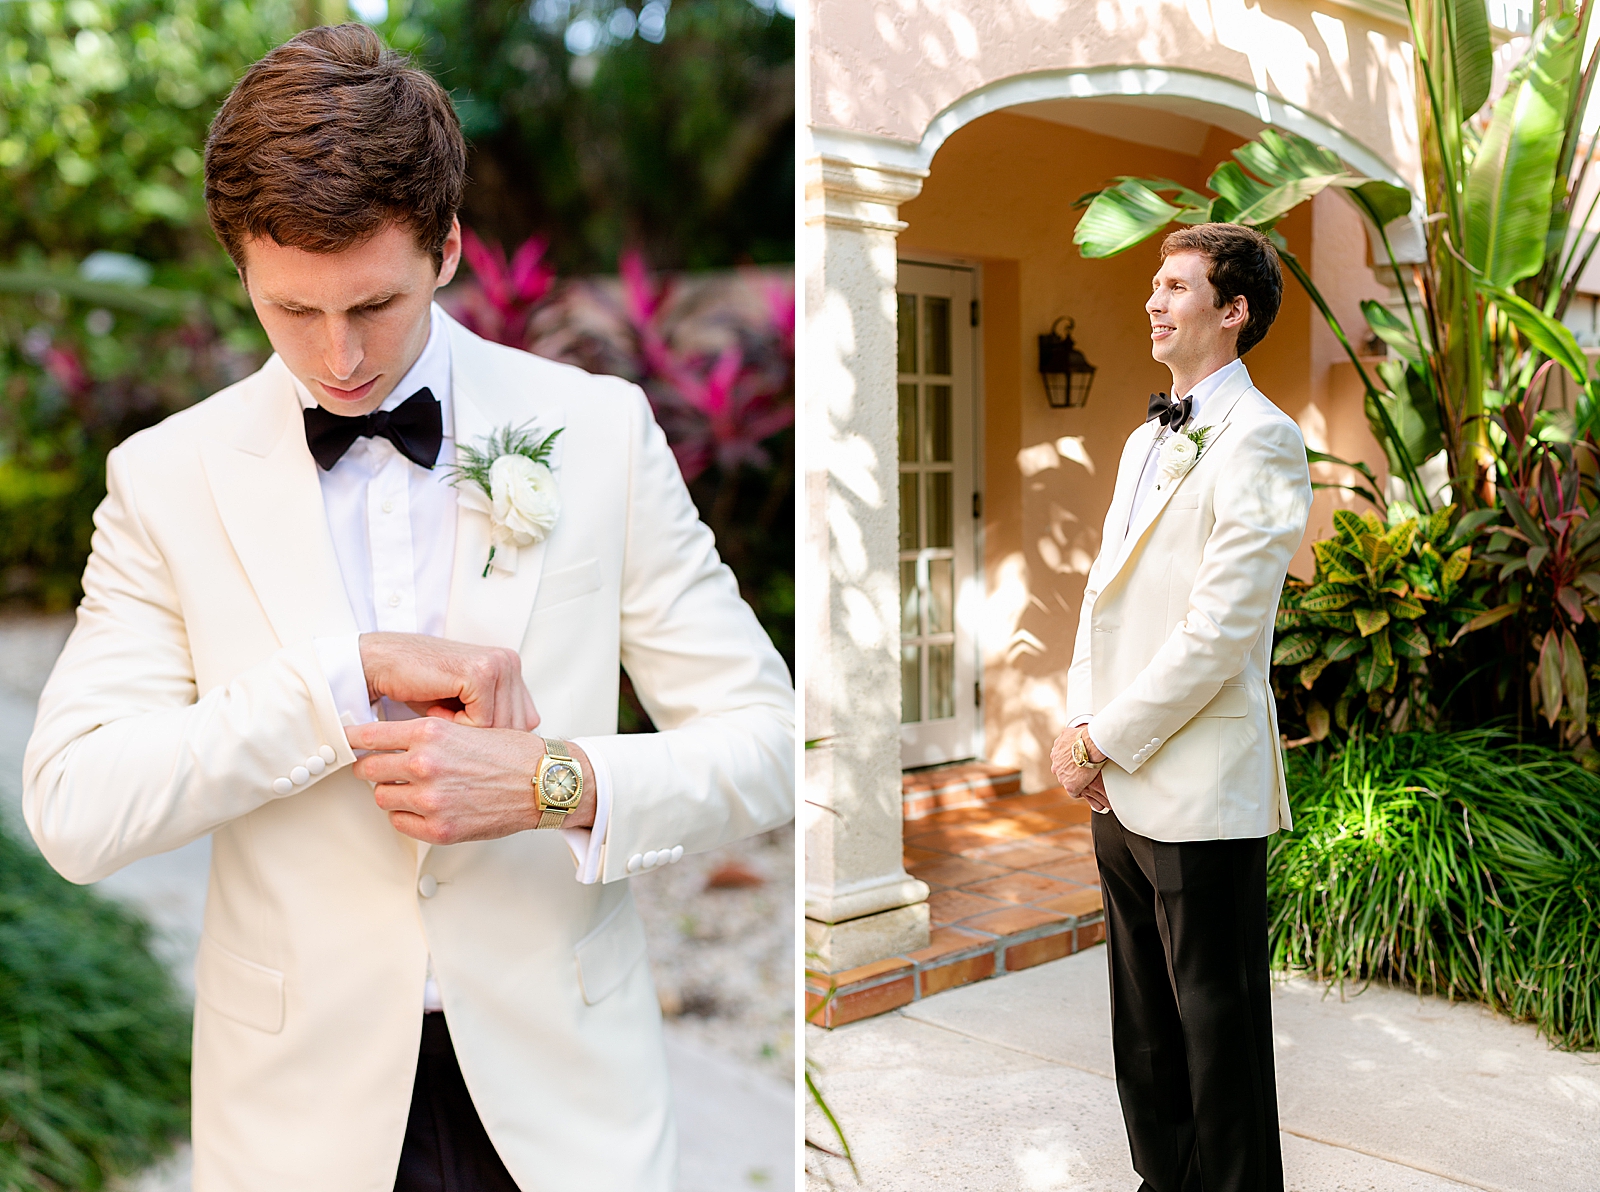 Groom in courtyard wearing white suit and adjusting cuff